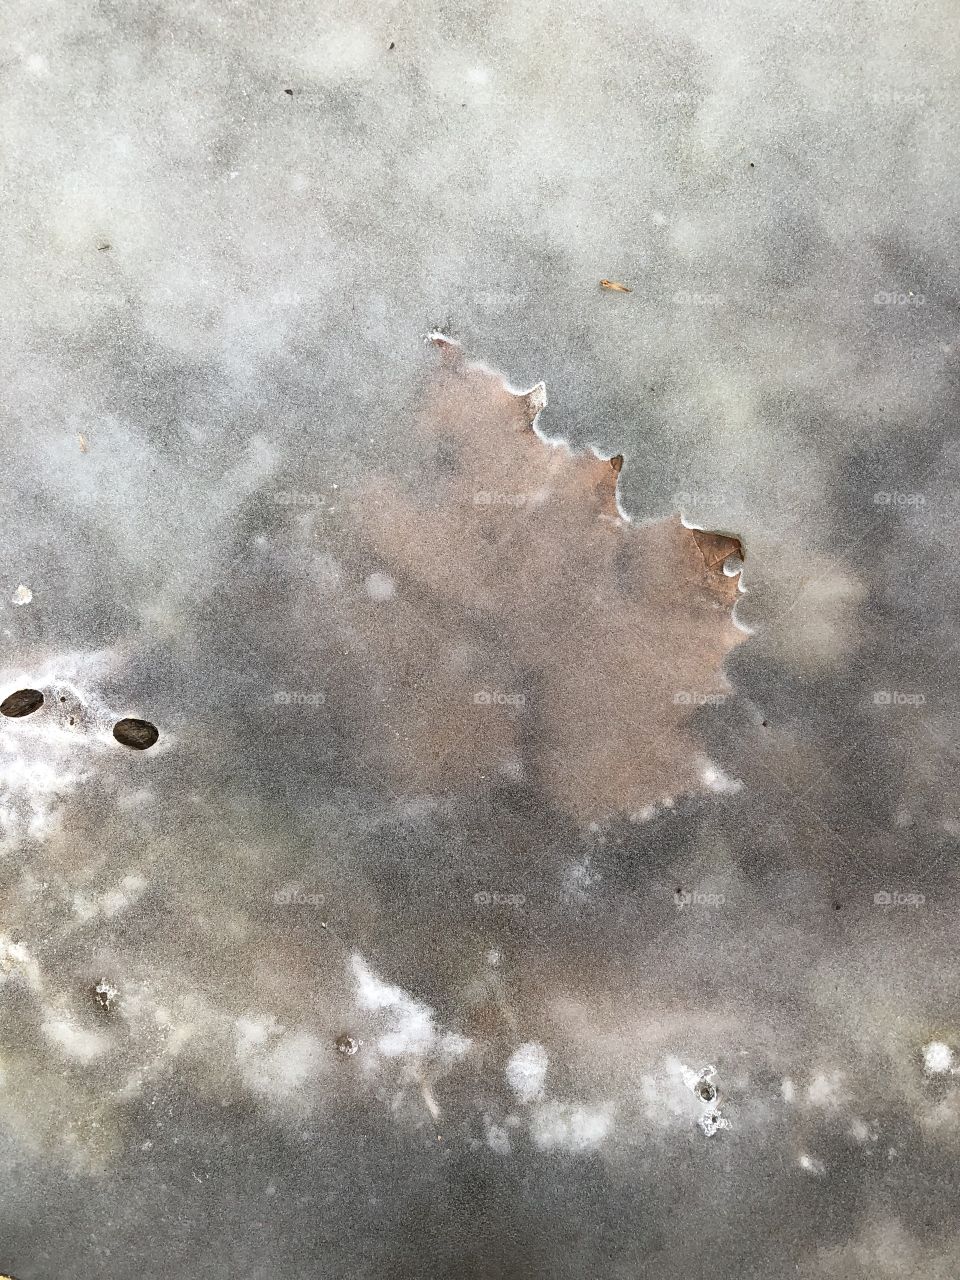 A large leaf protrudes slightly from the glassy, translucent ice on the forest floor